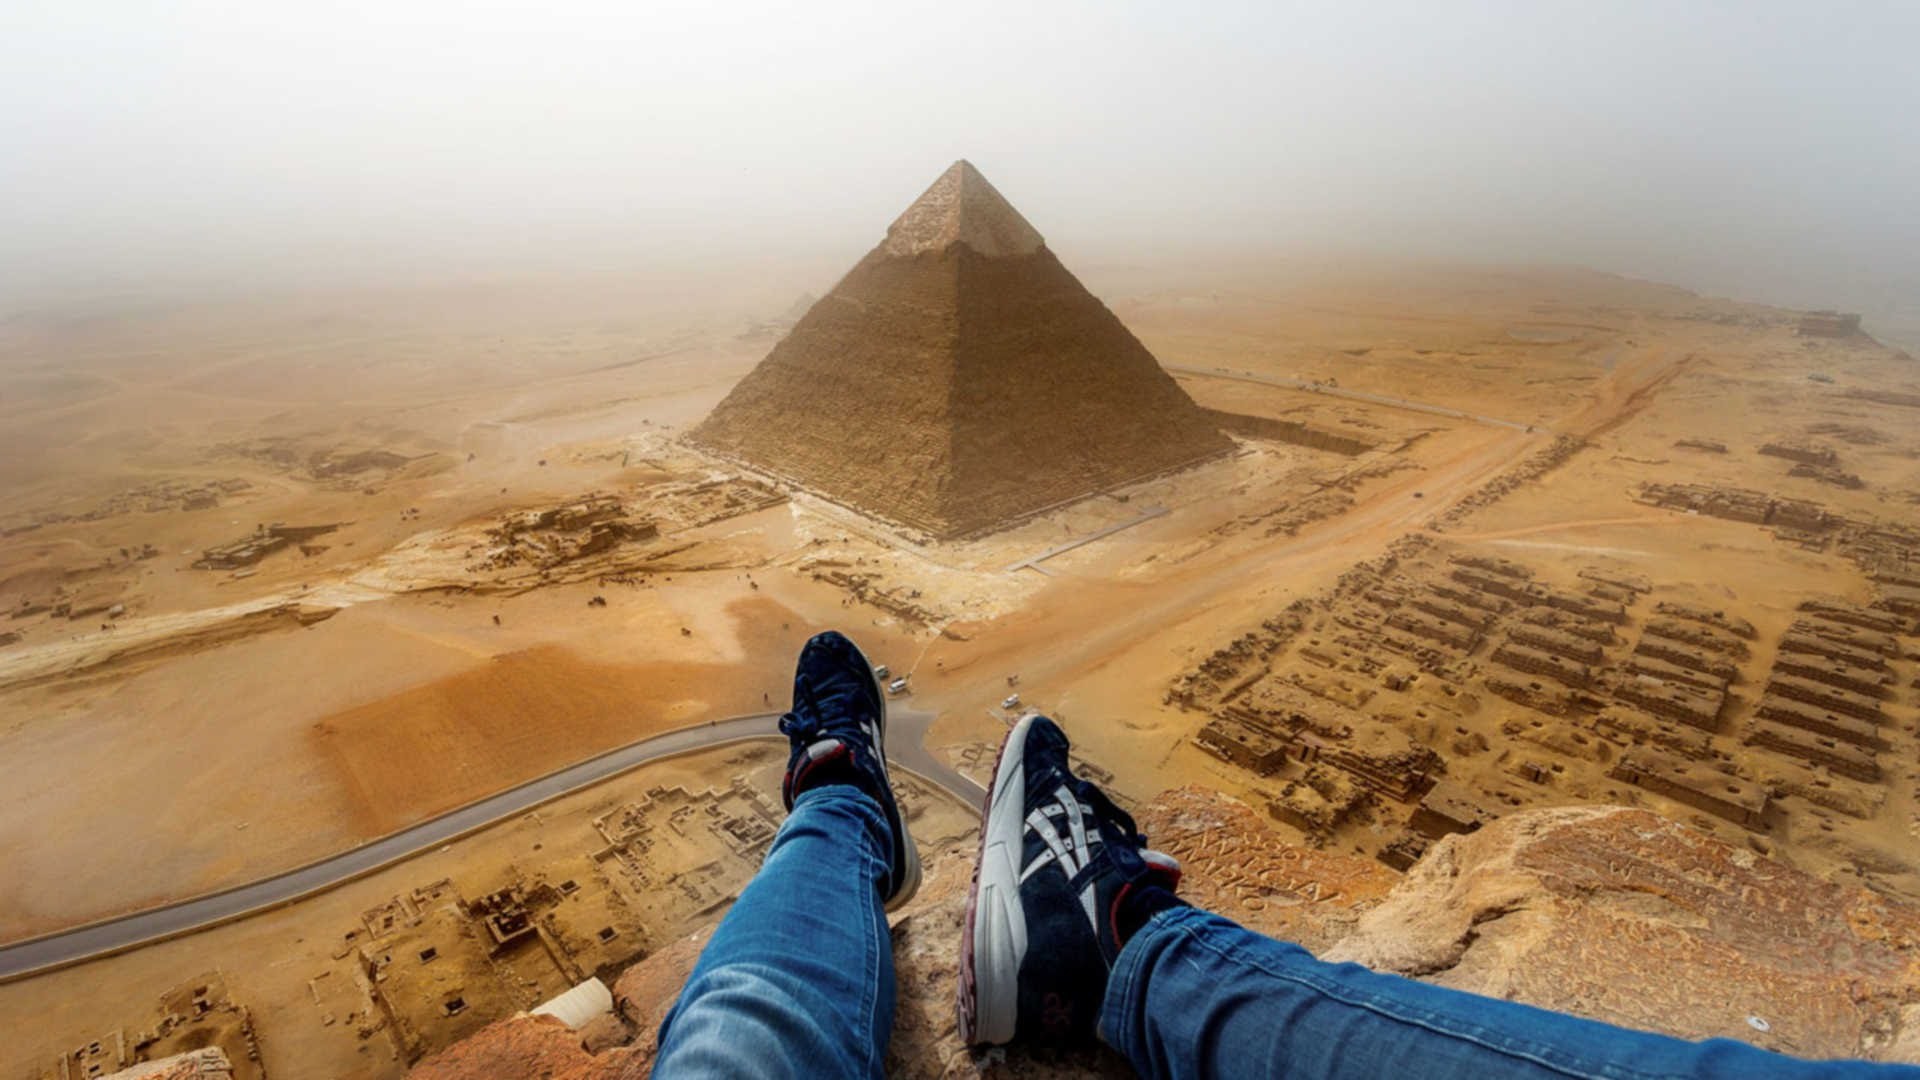 1920x1080 Daredevil Climbs Up The Pyramid Of Giza In Egypt And Captures An Amazing  View From The Top